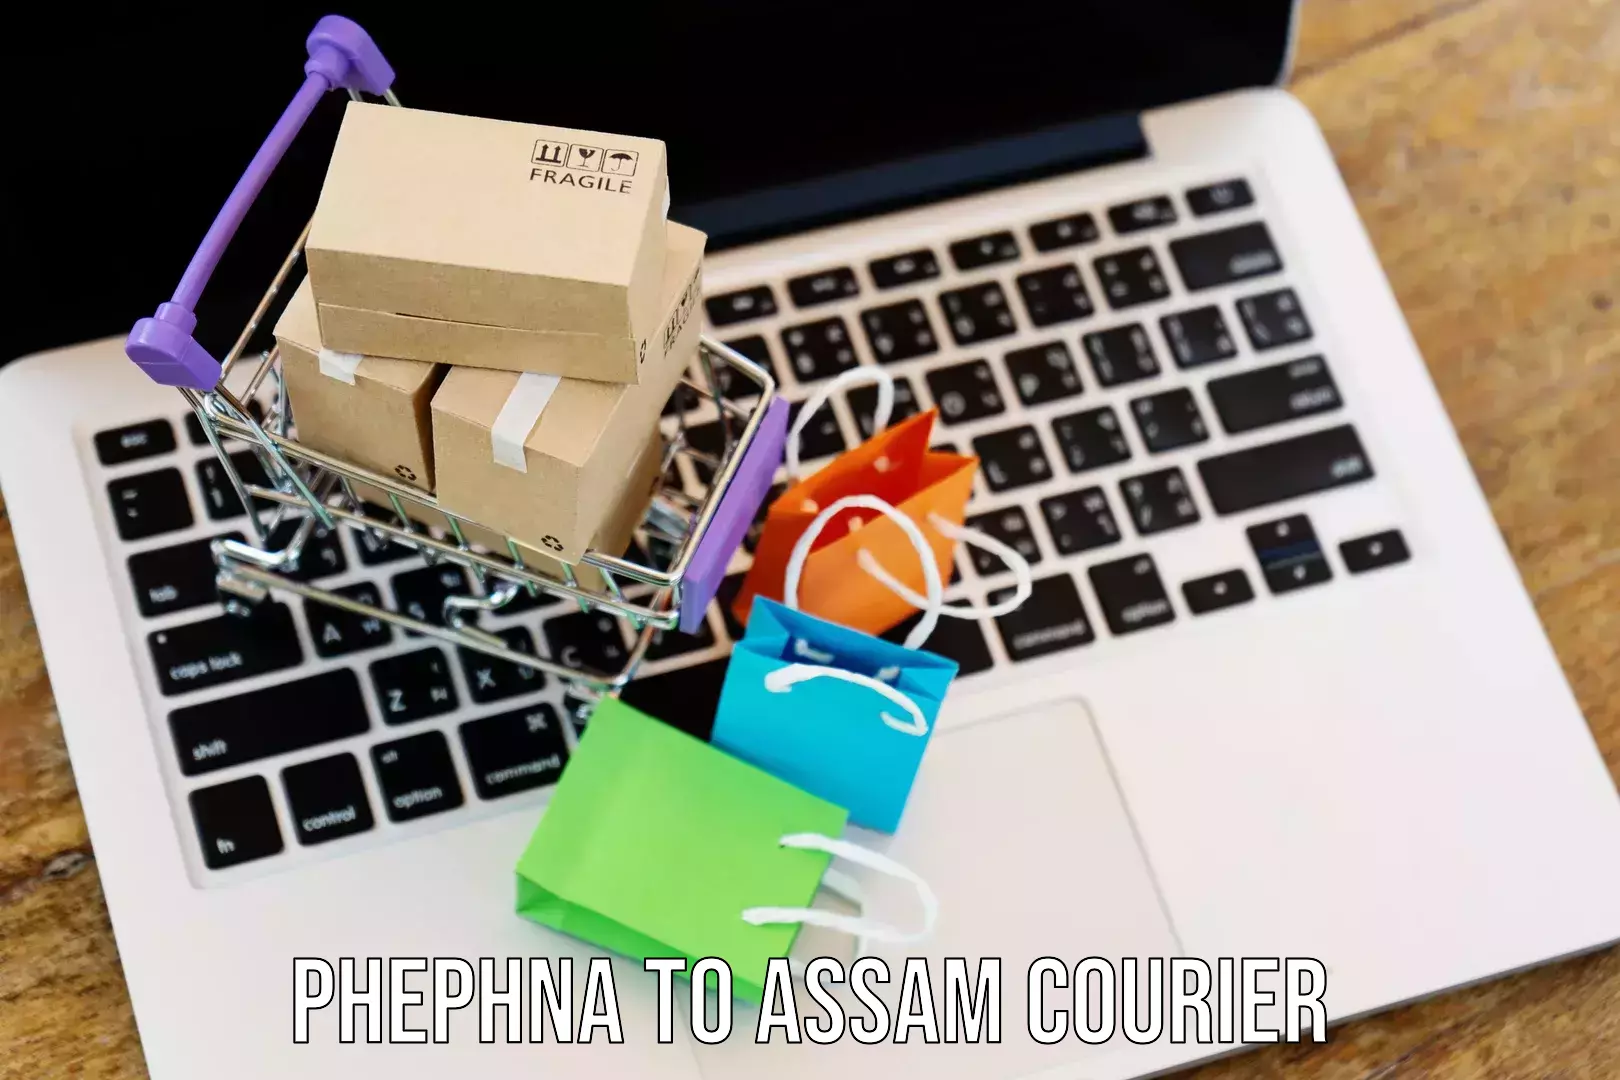 24/7 shipping services in Phephna to Assam